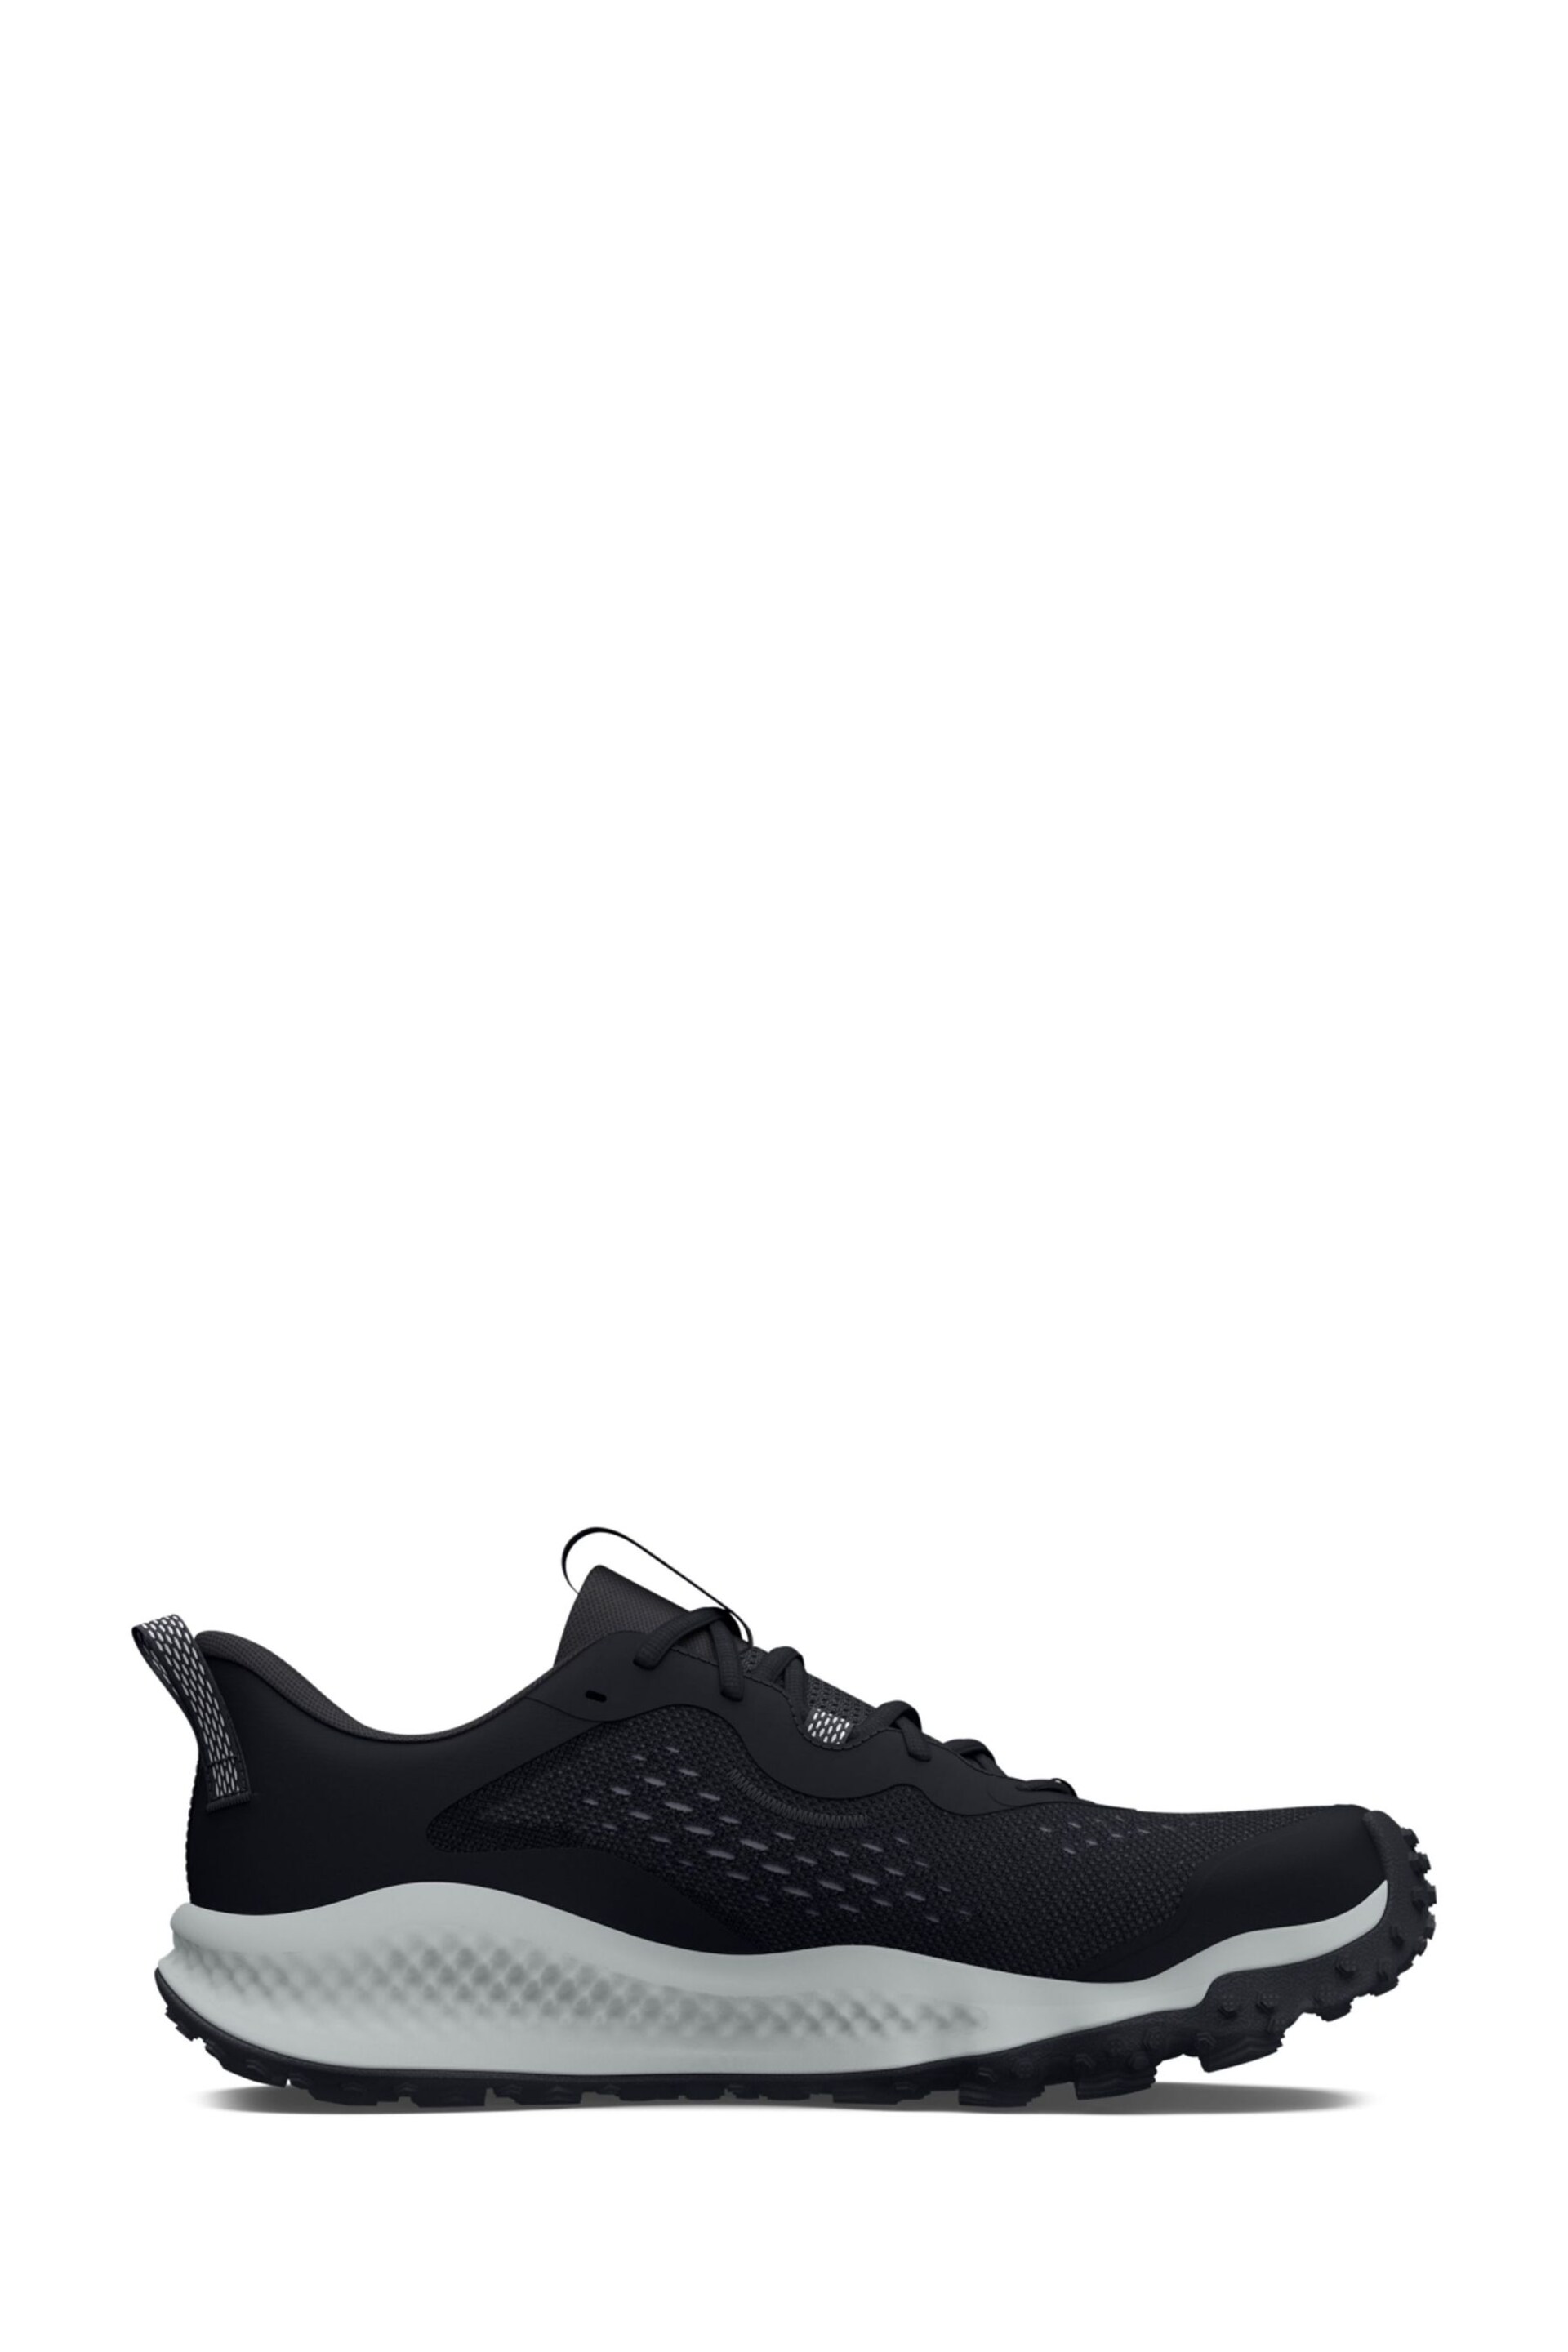 Under Armour Charged Maven Black Trainers - Image 6 of 6